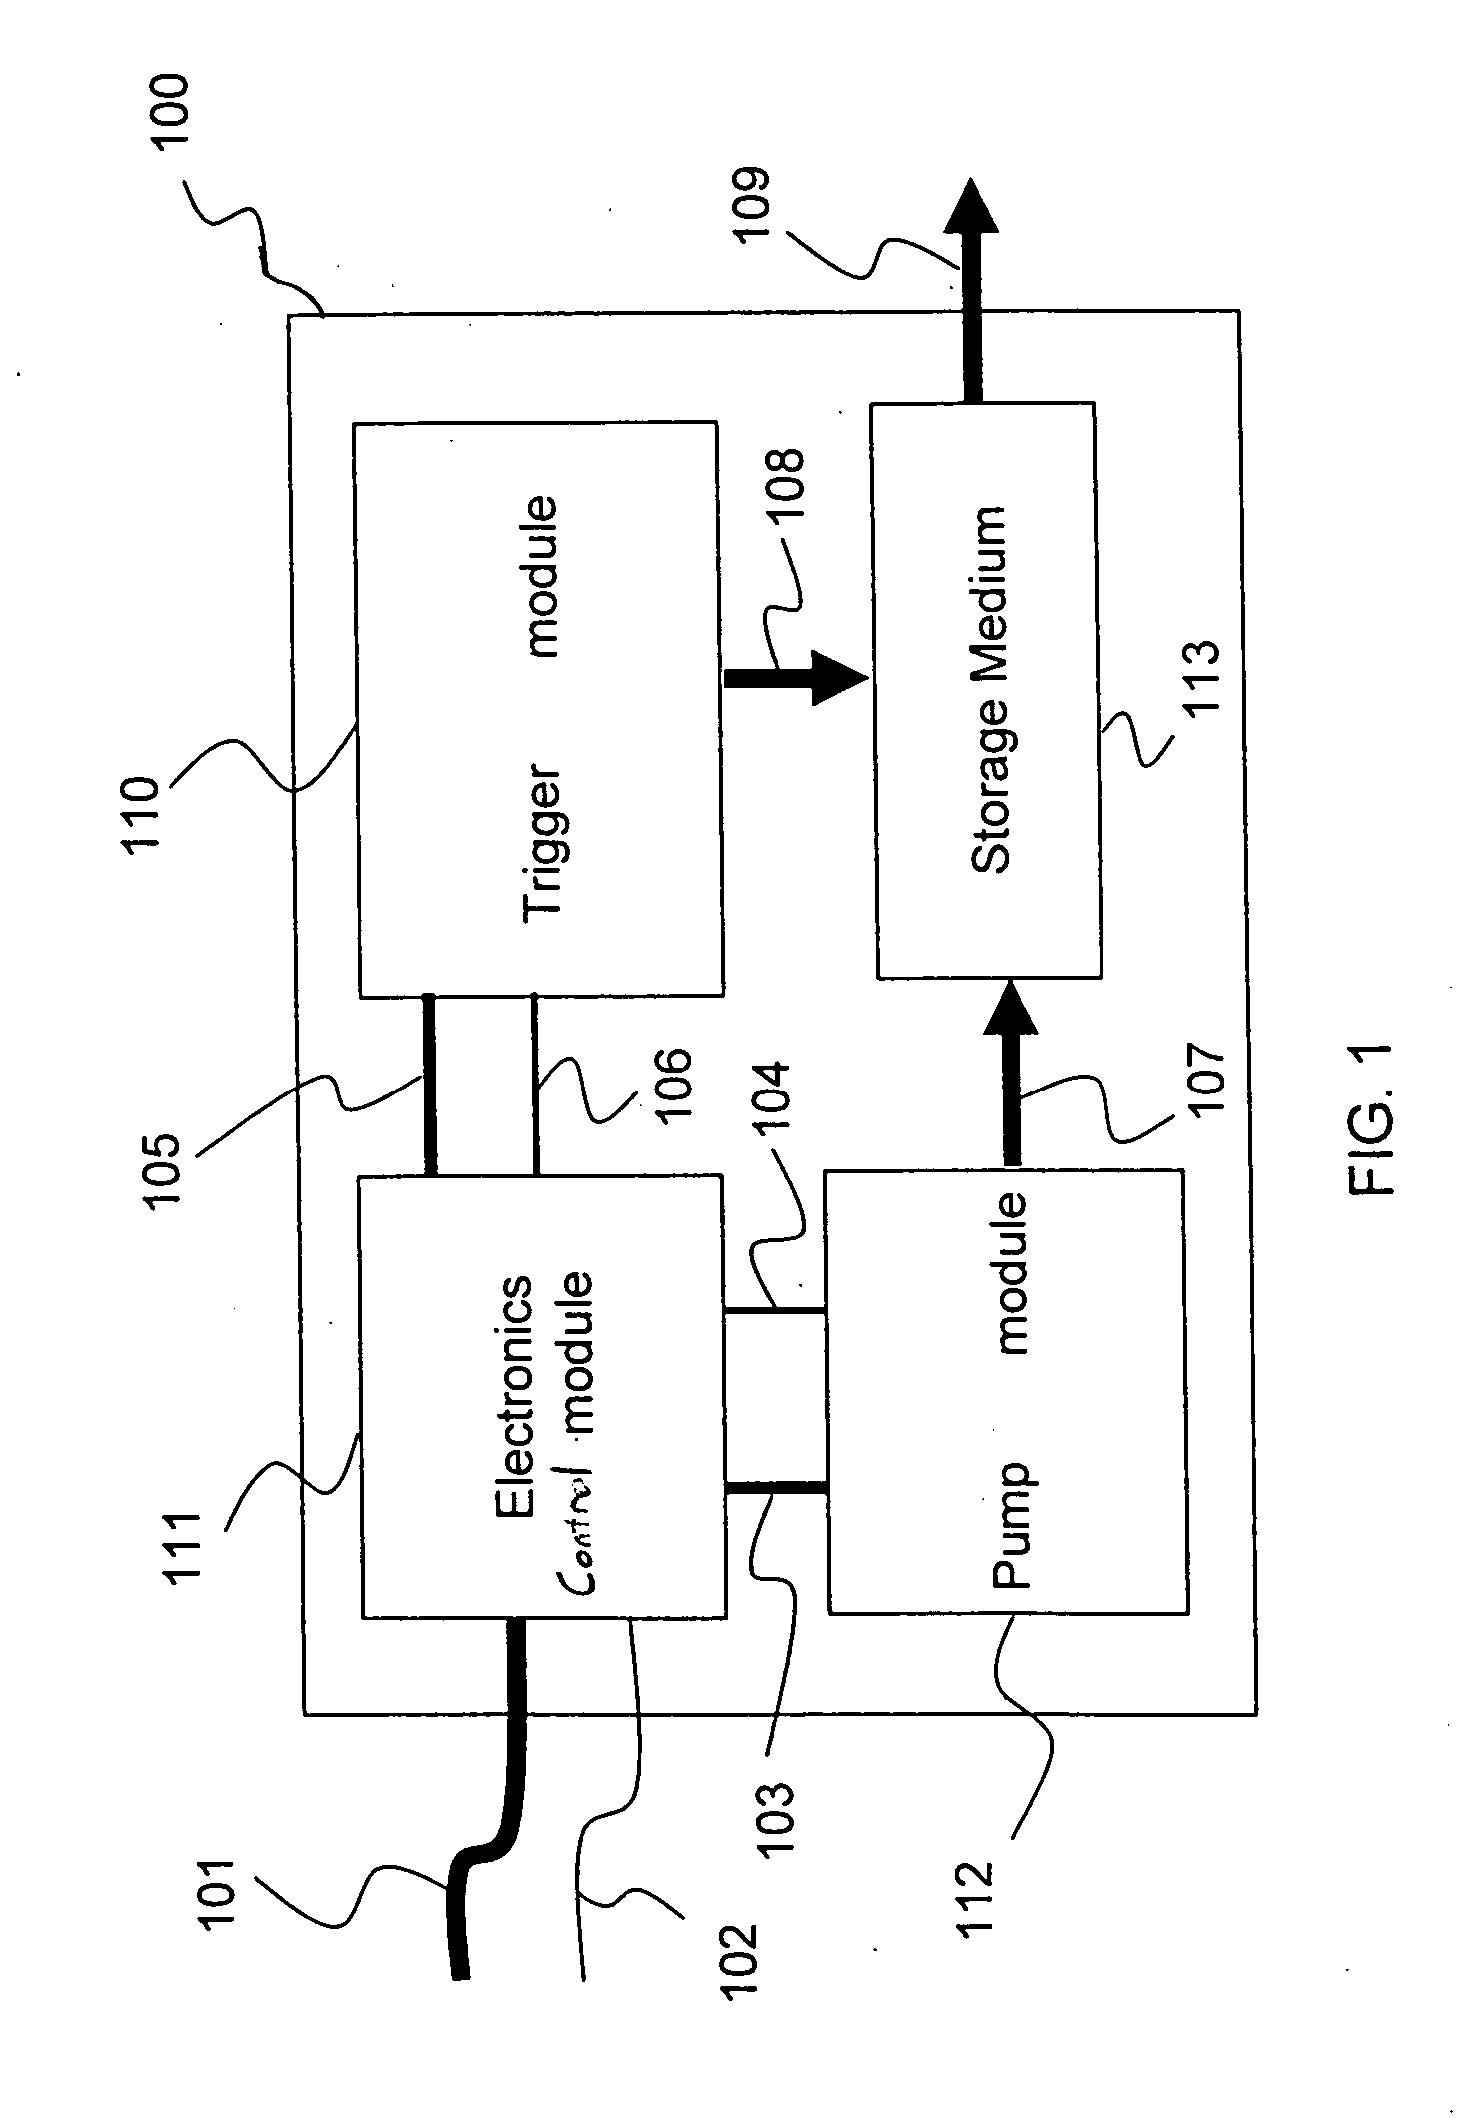 Apparatus and method for generating short optical pulses